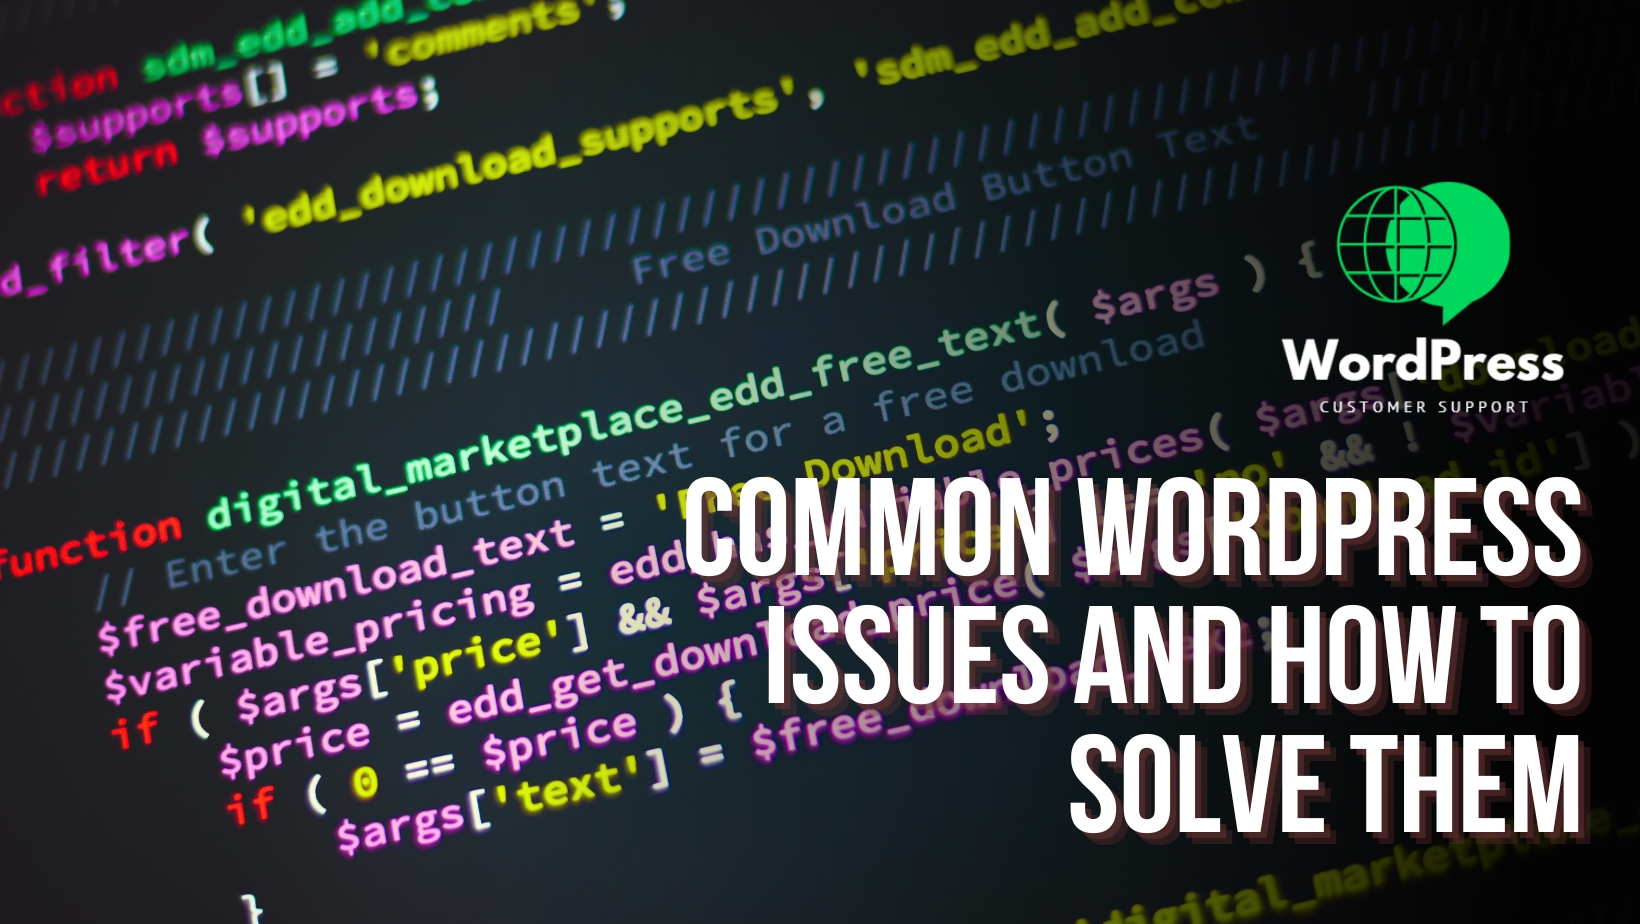 Common WordPress Issues and How to Solve Them